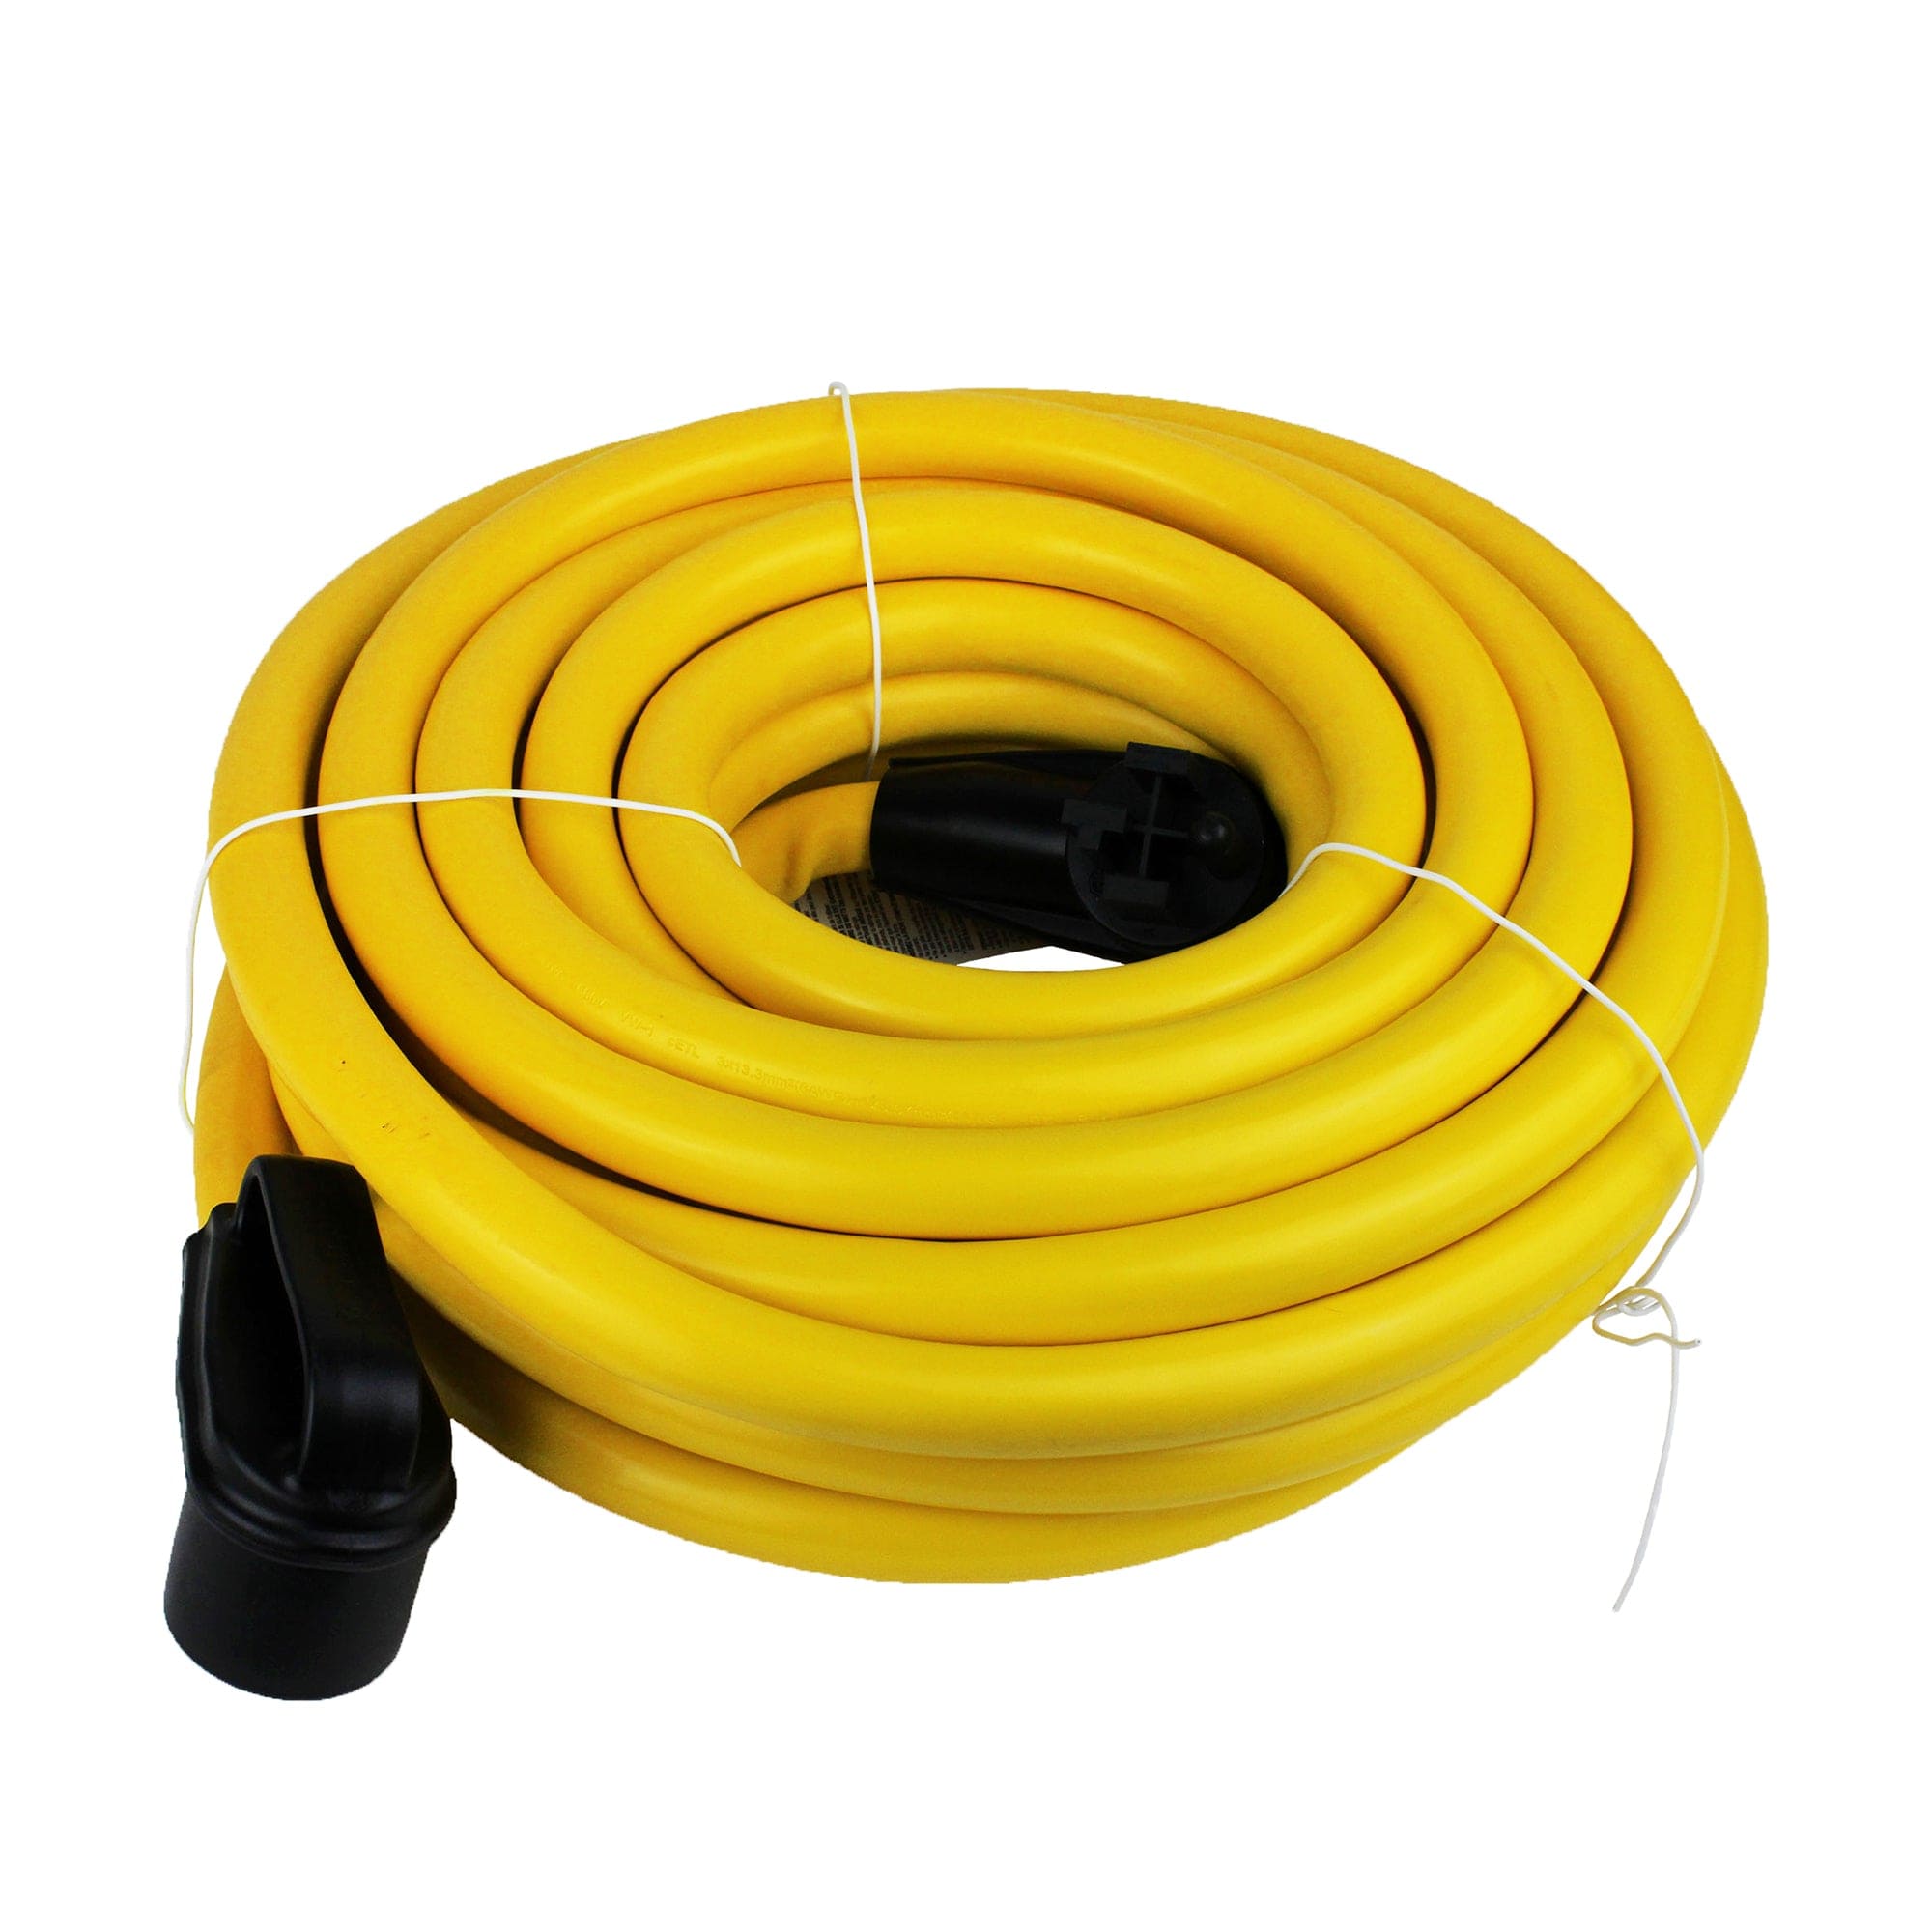 Weekender 50ARVE50 10' 50A Extension Cord W/ Handle